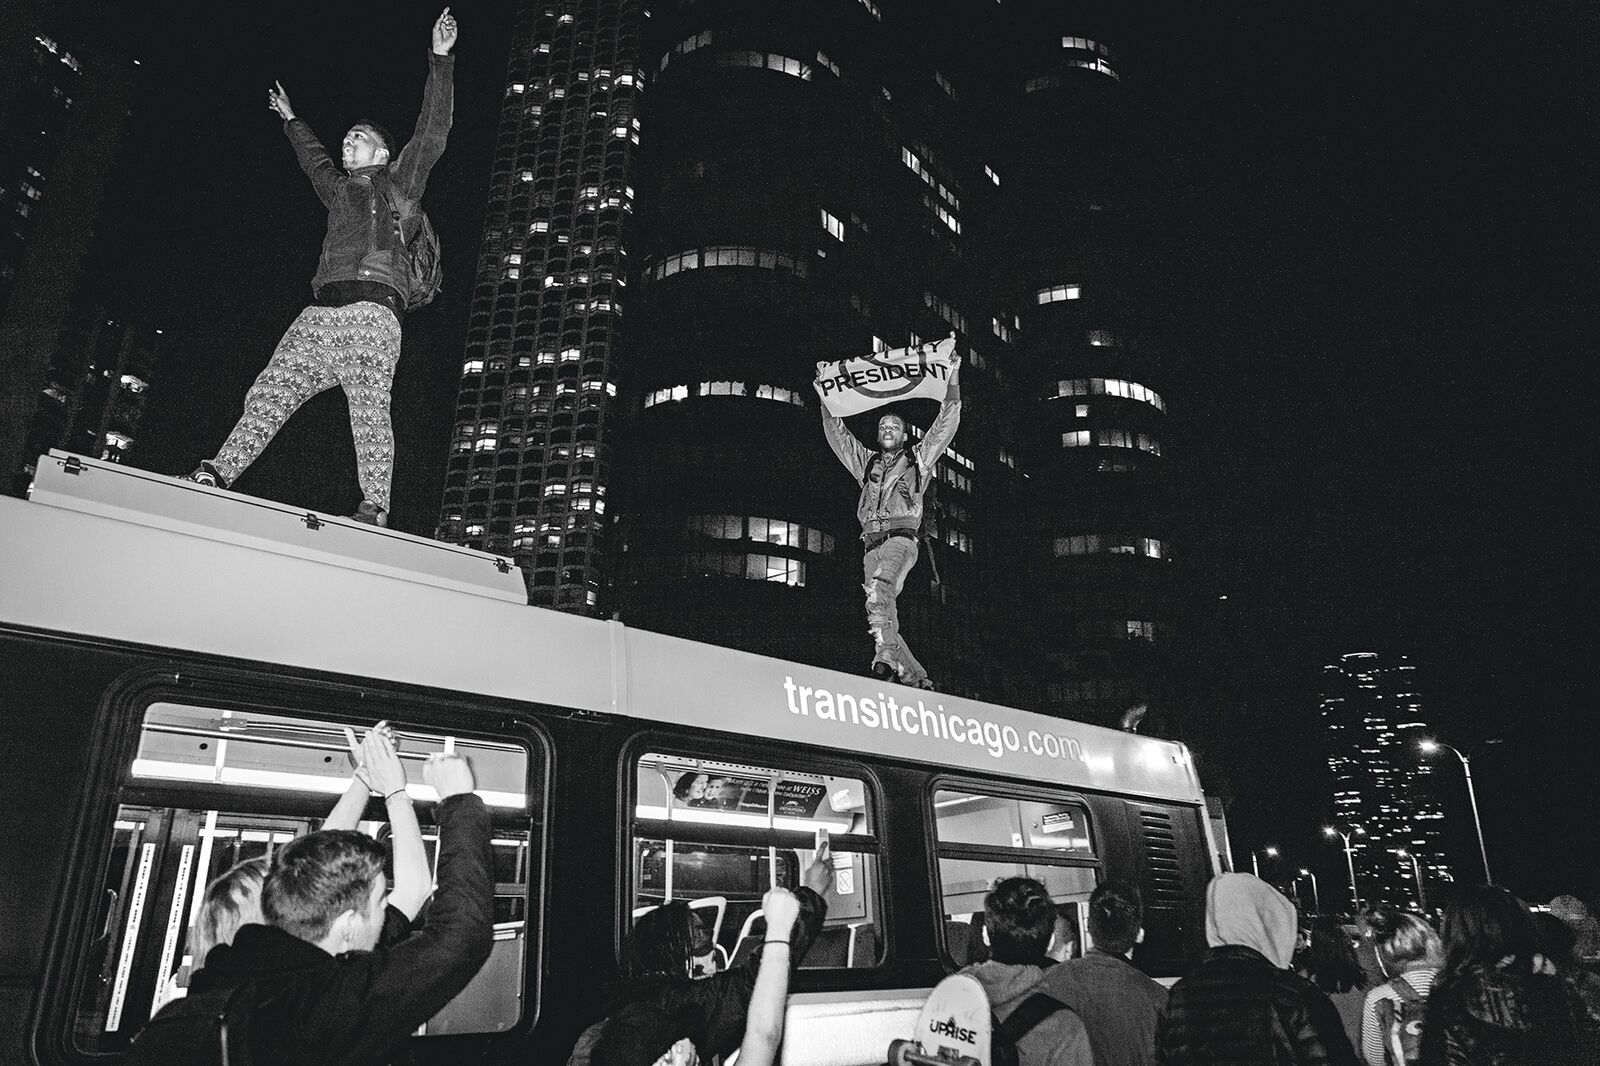 Demonstrators standing on top of a CTA Bus in Chicago protesting the election of Donald Trump